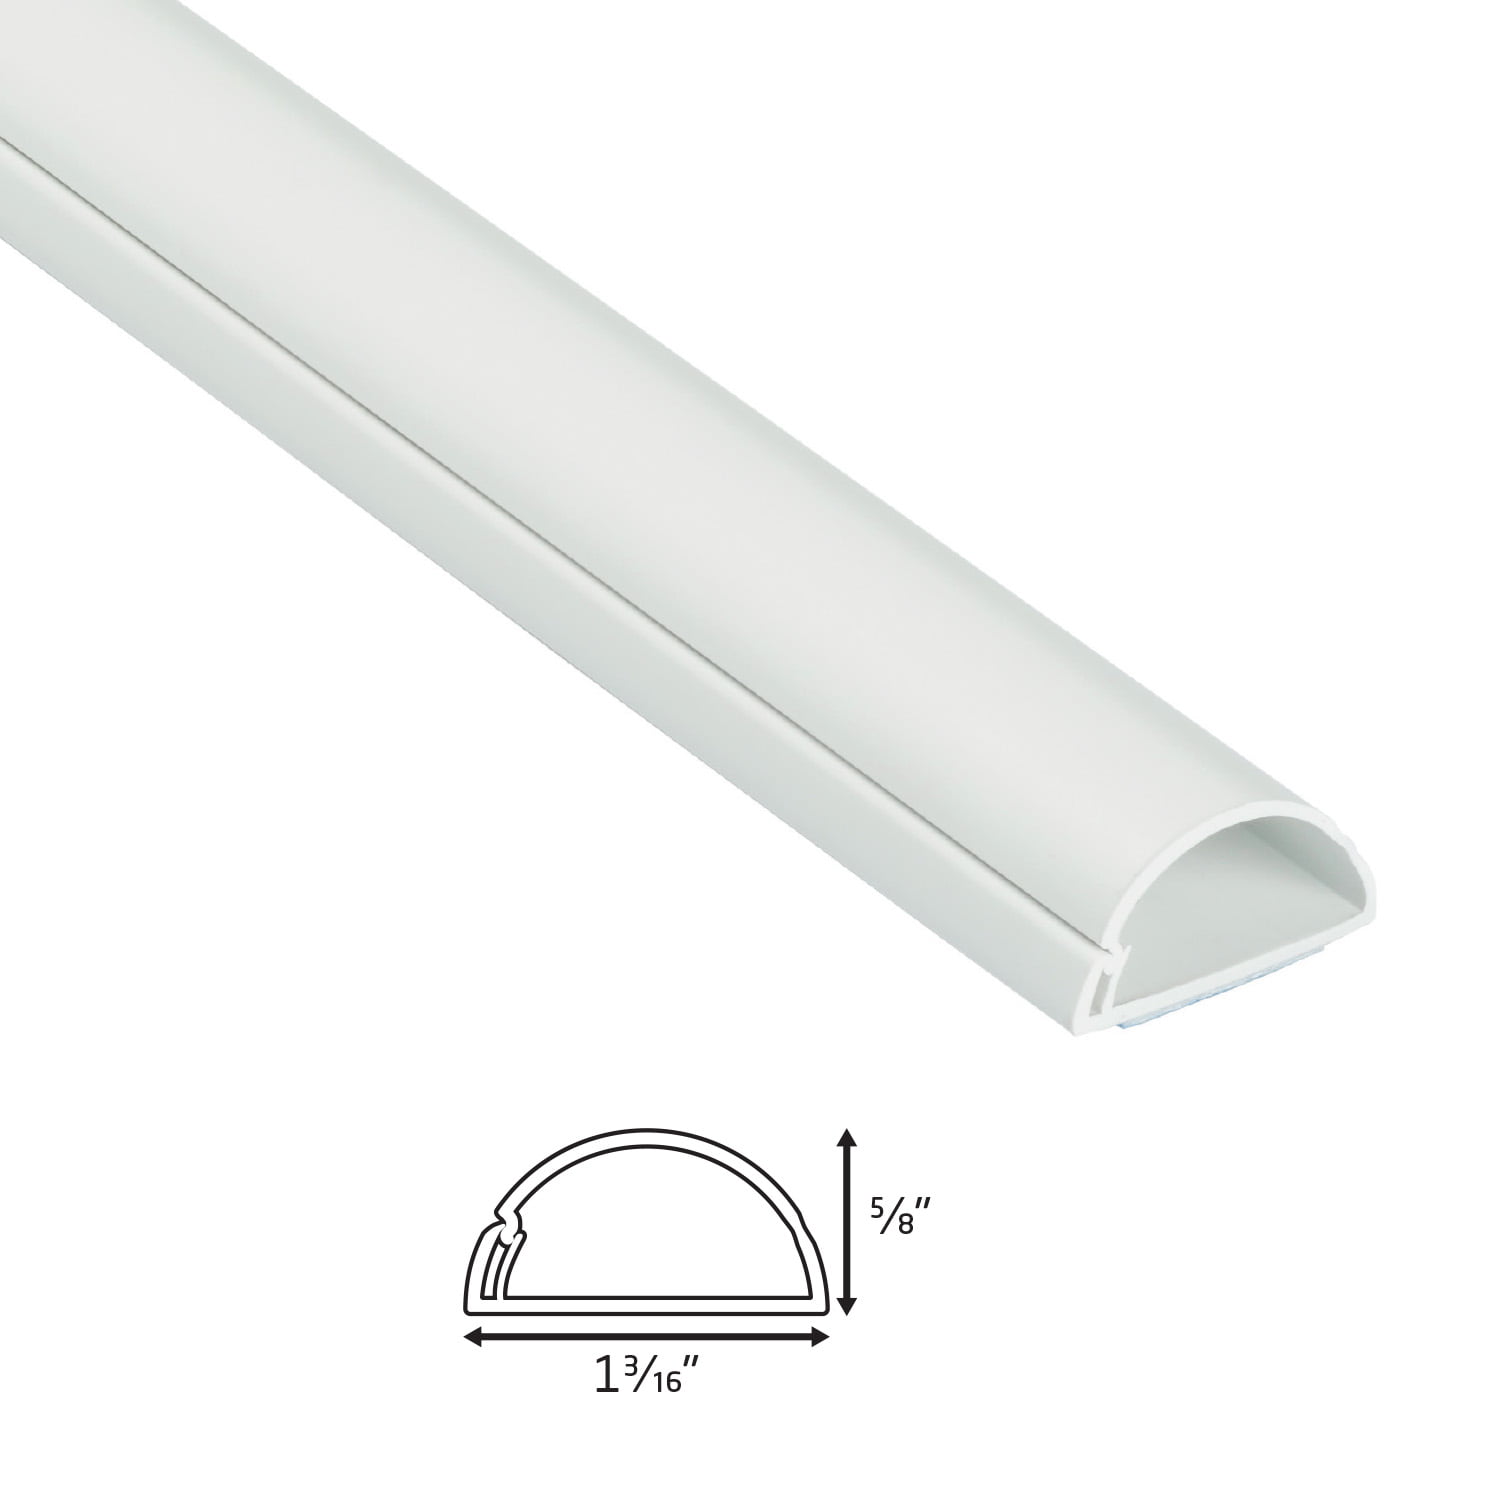 D-Line 3008442 39 in. PVC Cord Cover White